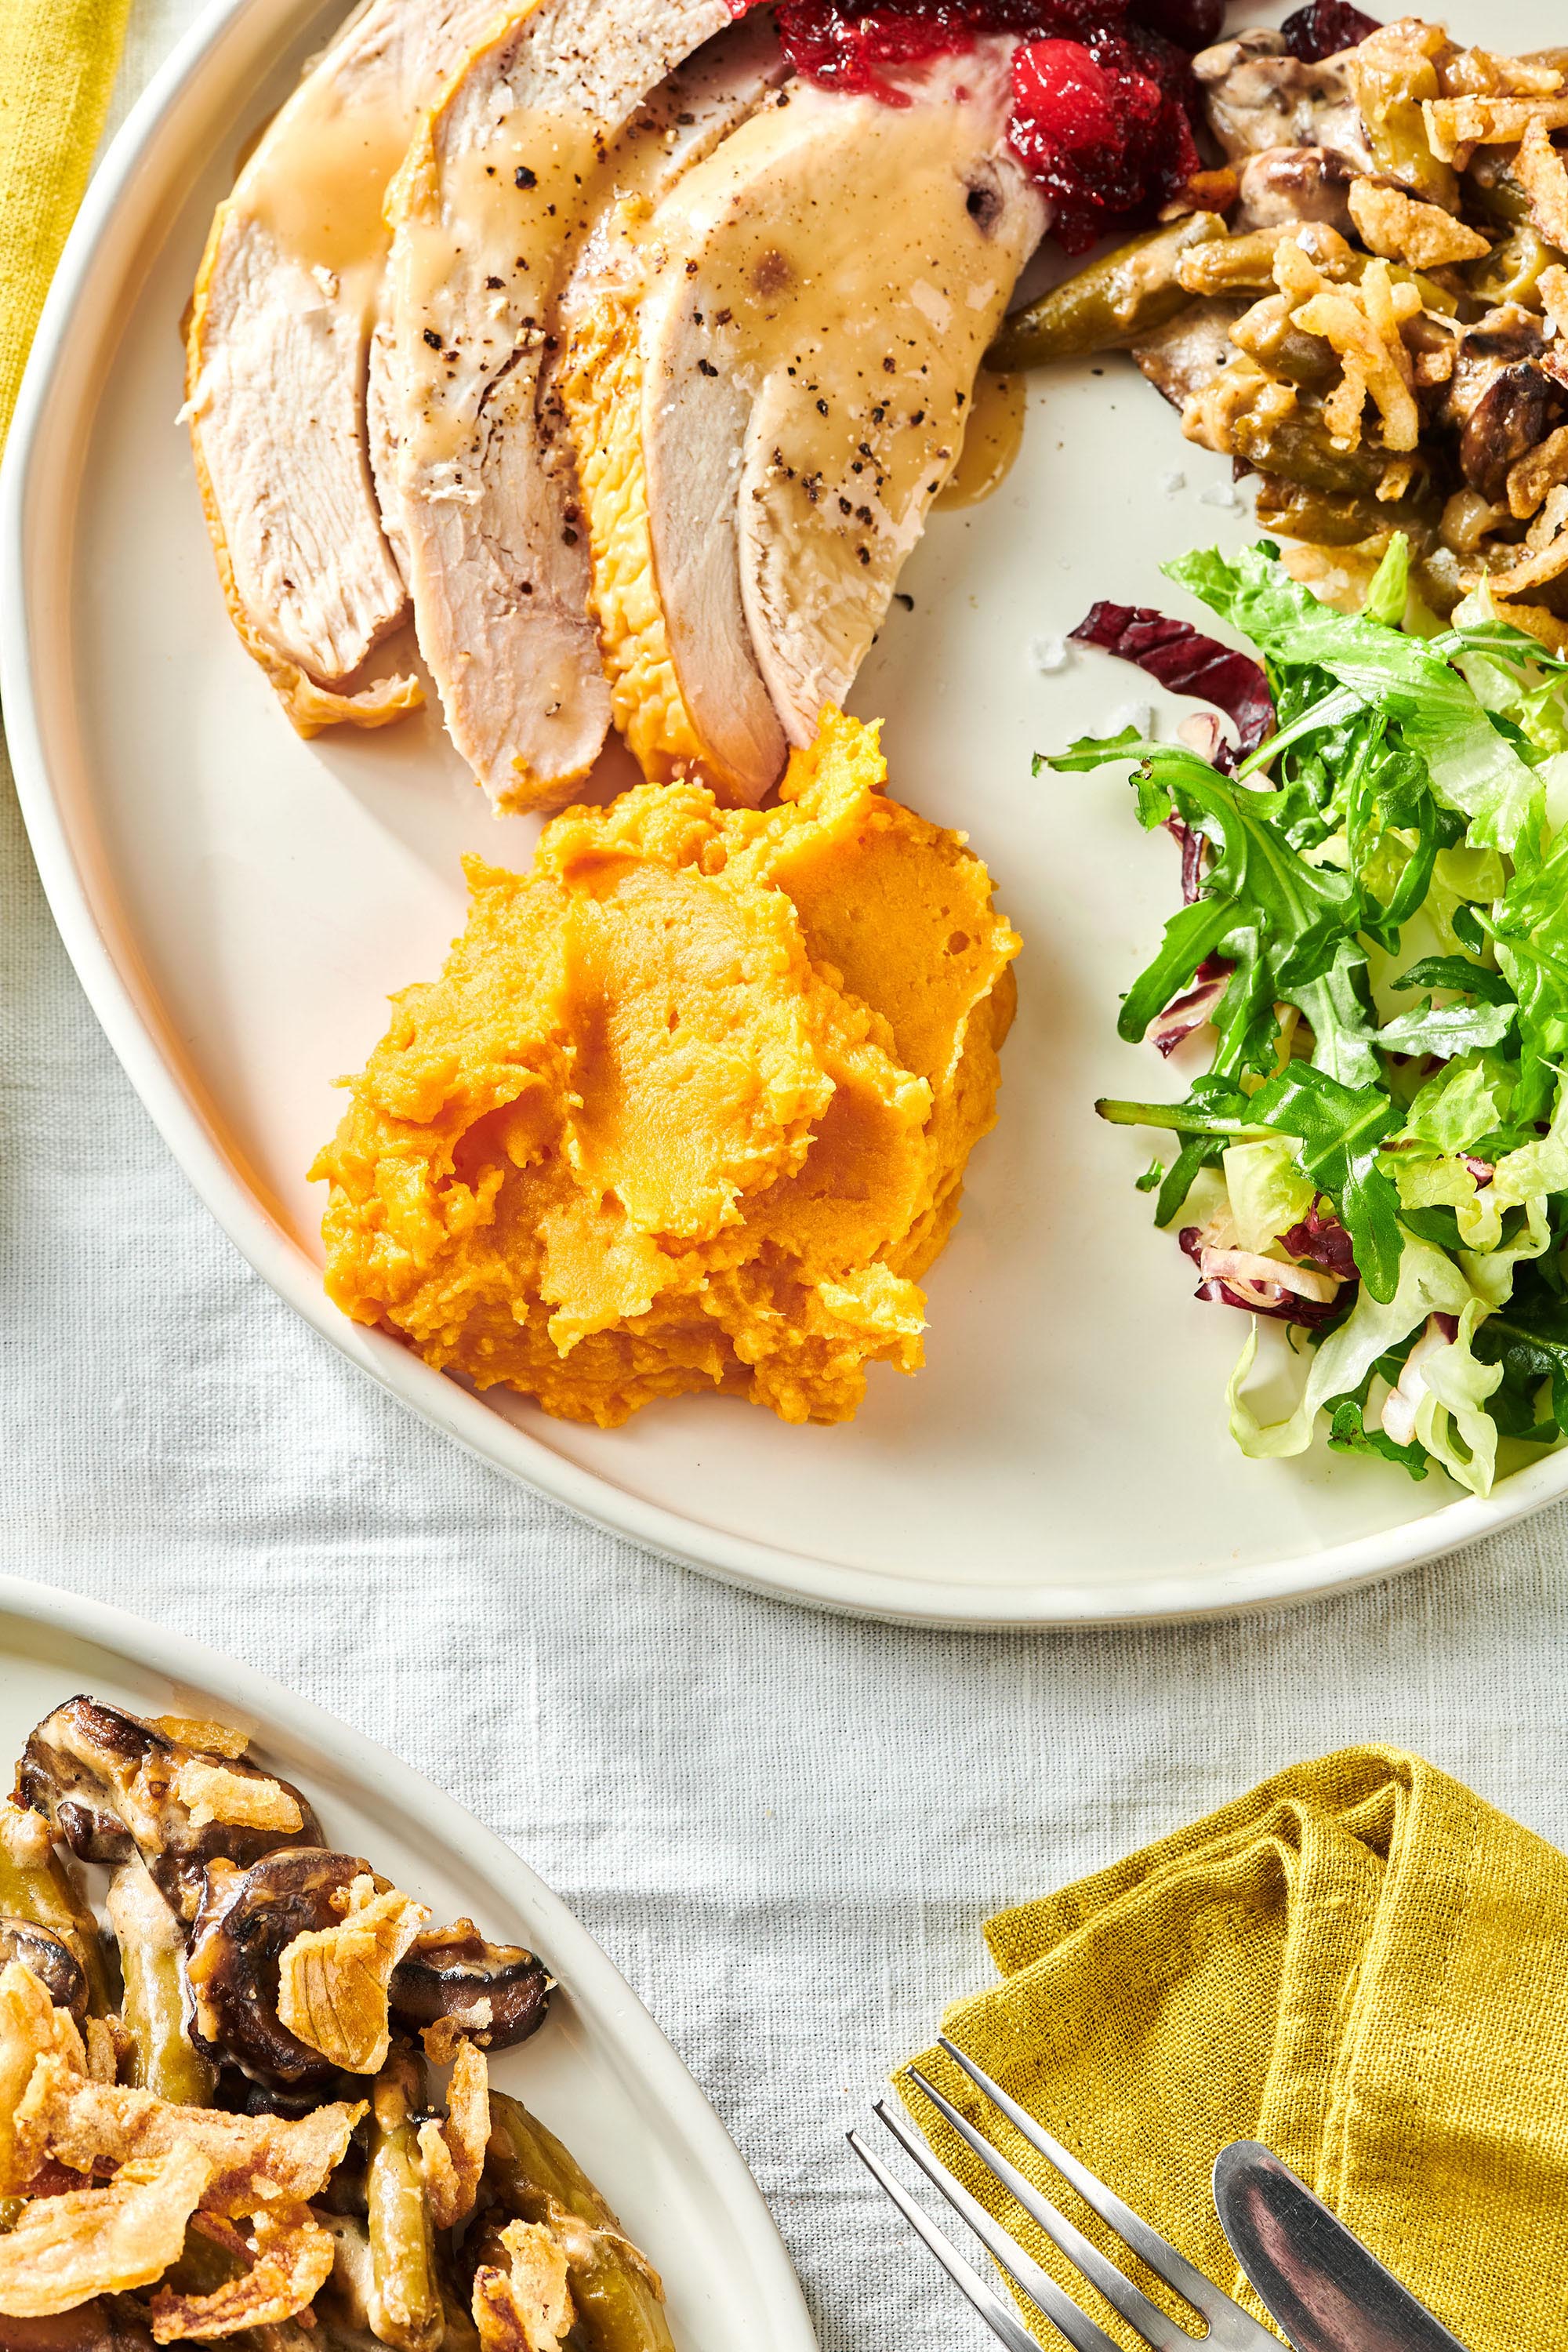 Plate of turkey, cranberry sauce, salad, and Garlic Mashed Sweet Potatoes.